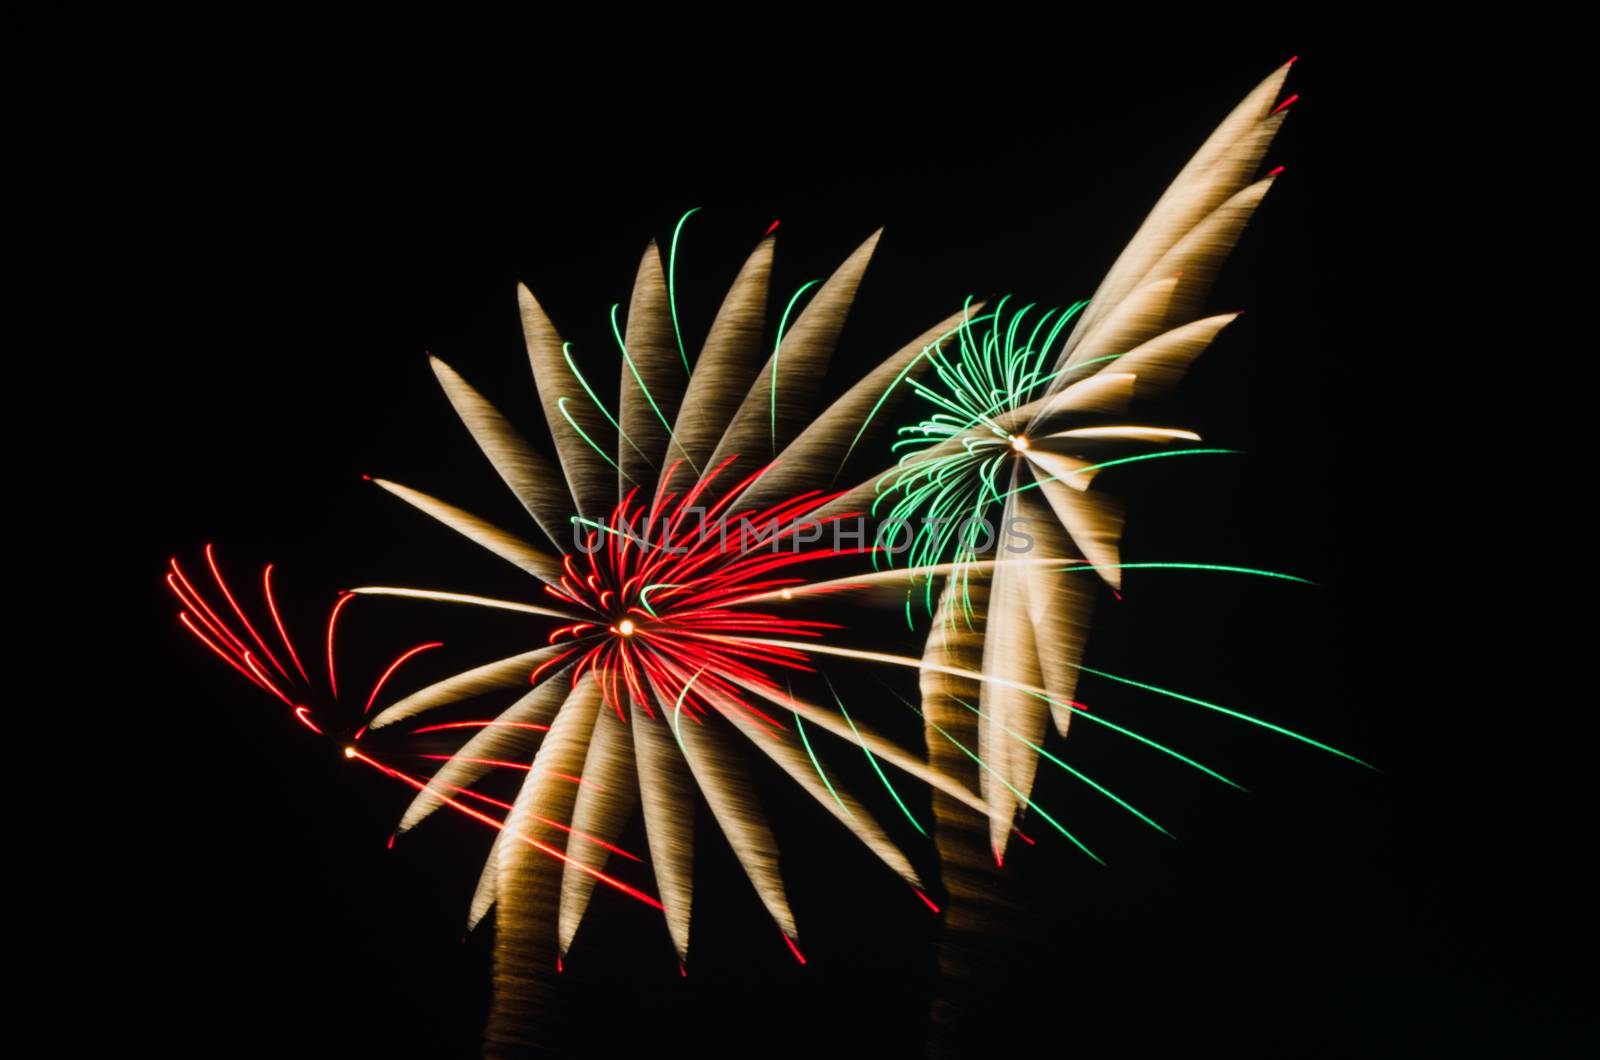 An image of exploding fireworks at night. Represents a celebration.